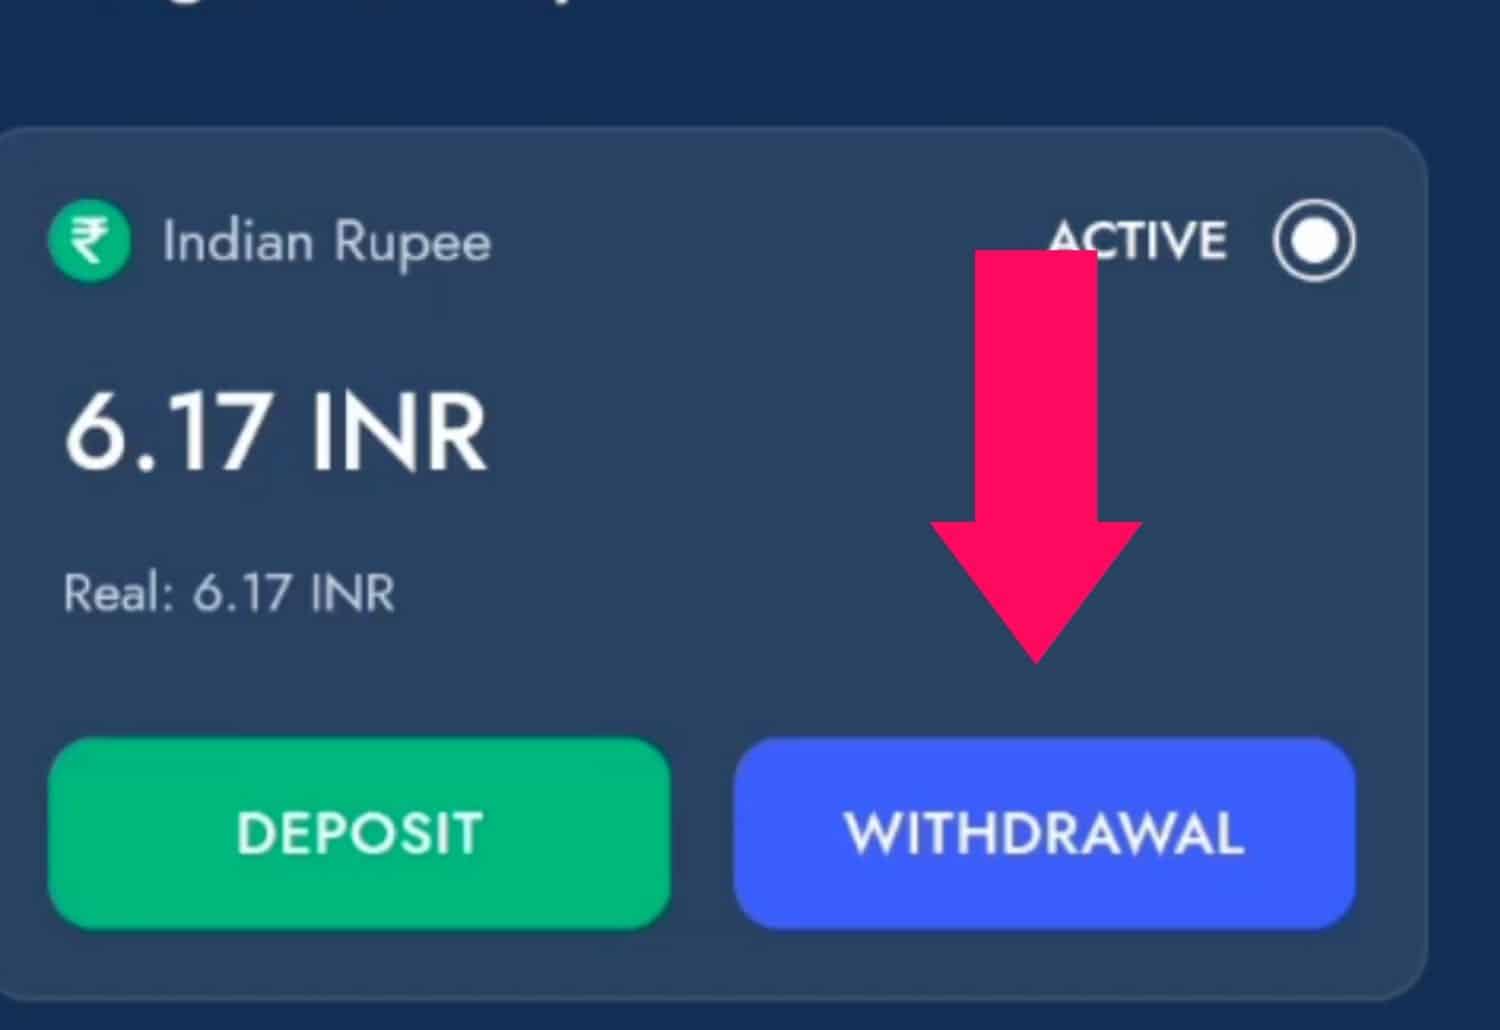 Bluechip Casino India withdrawal option button